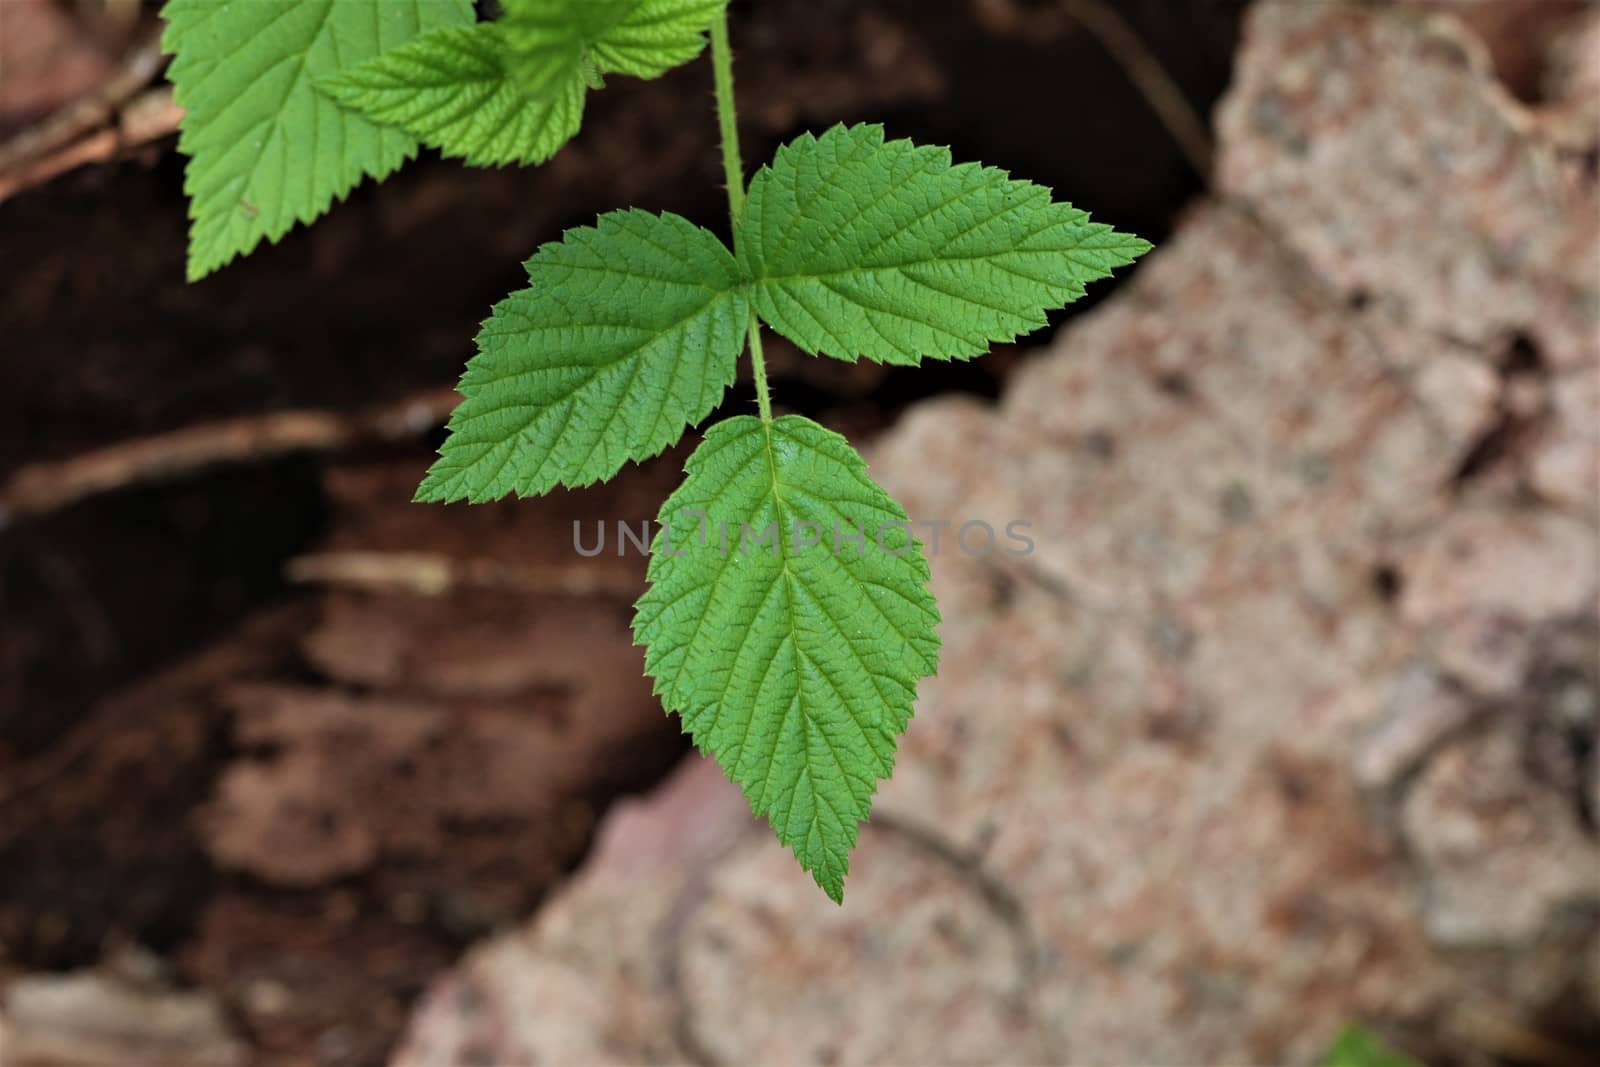 Green leaves in front of a brown blurry tree trunk